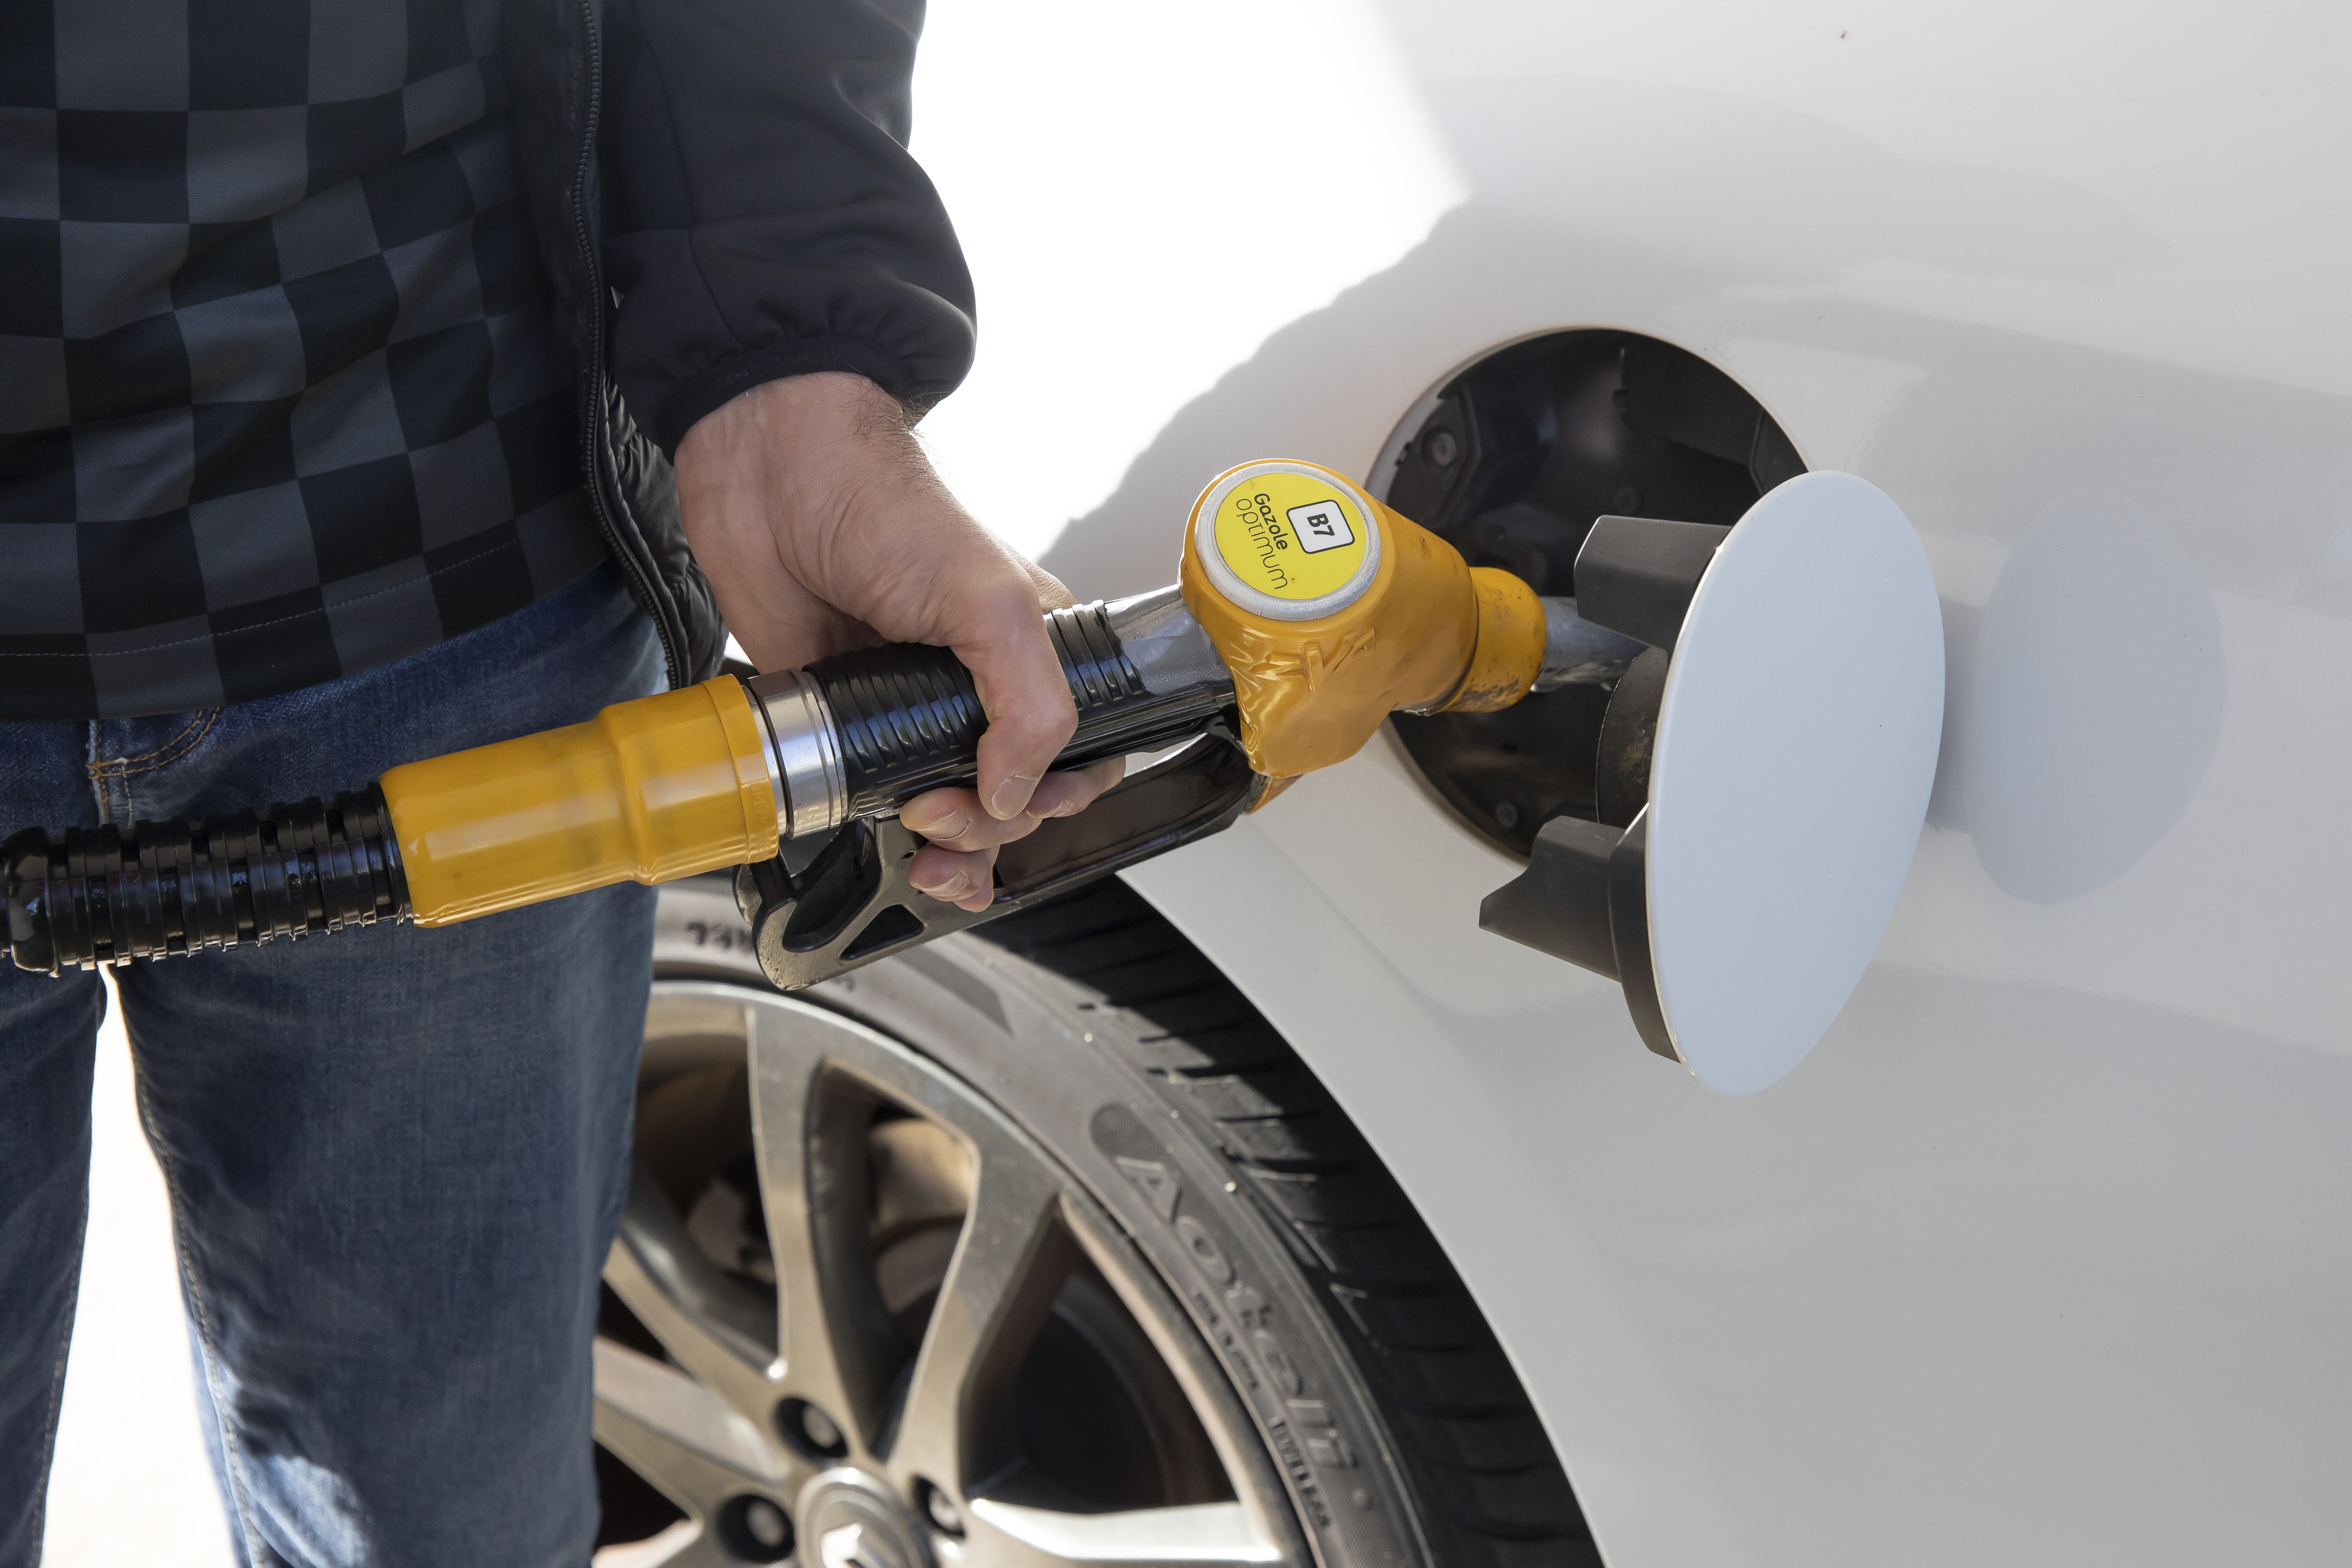 A man fills up the tank of his car at a gas station in Lille, north France, Oct. 6, 2022. France's energy sobriety plan will cost 800 million euros (785 million U.S. dollars), Minister for Energy Transition Agnes Pannier-Runacher said on Thursday.